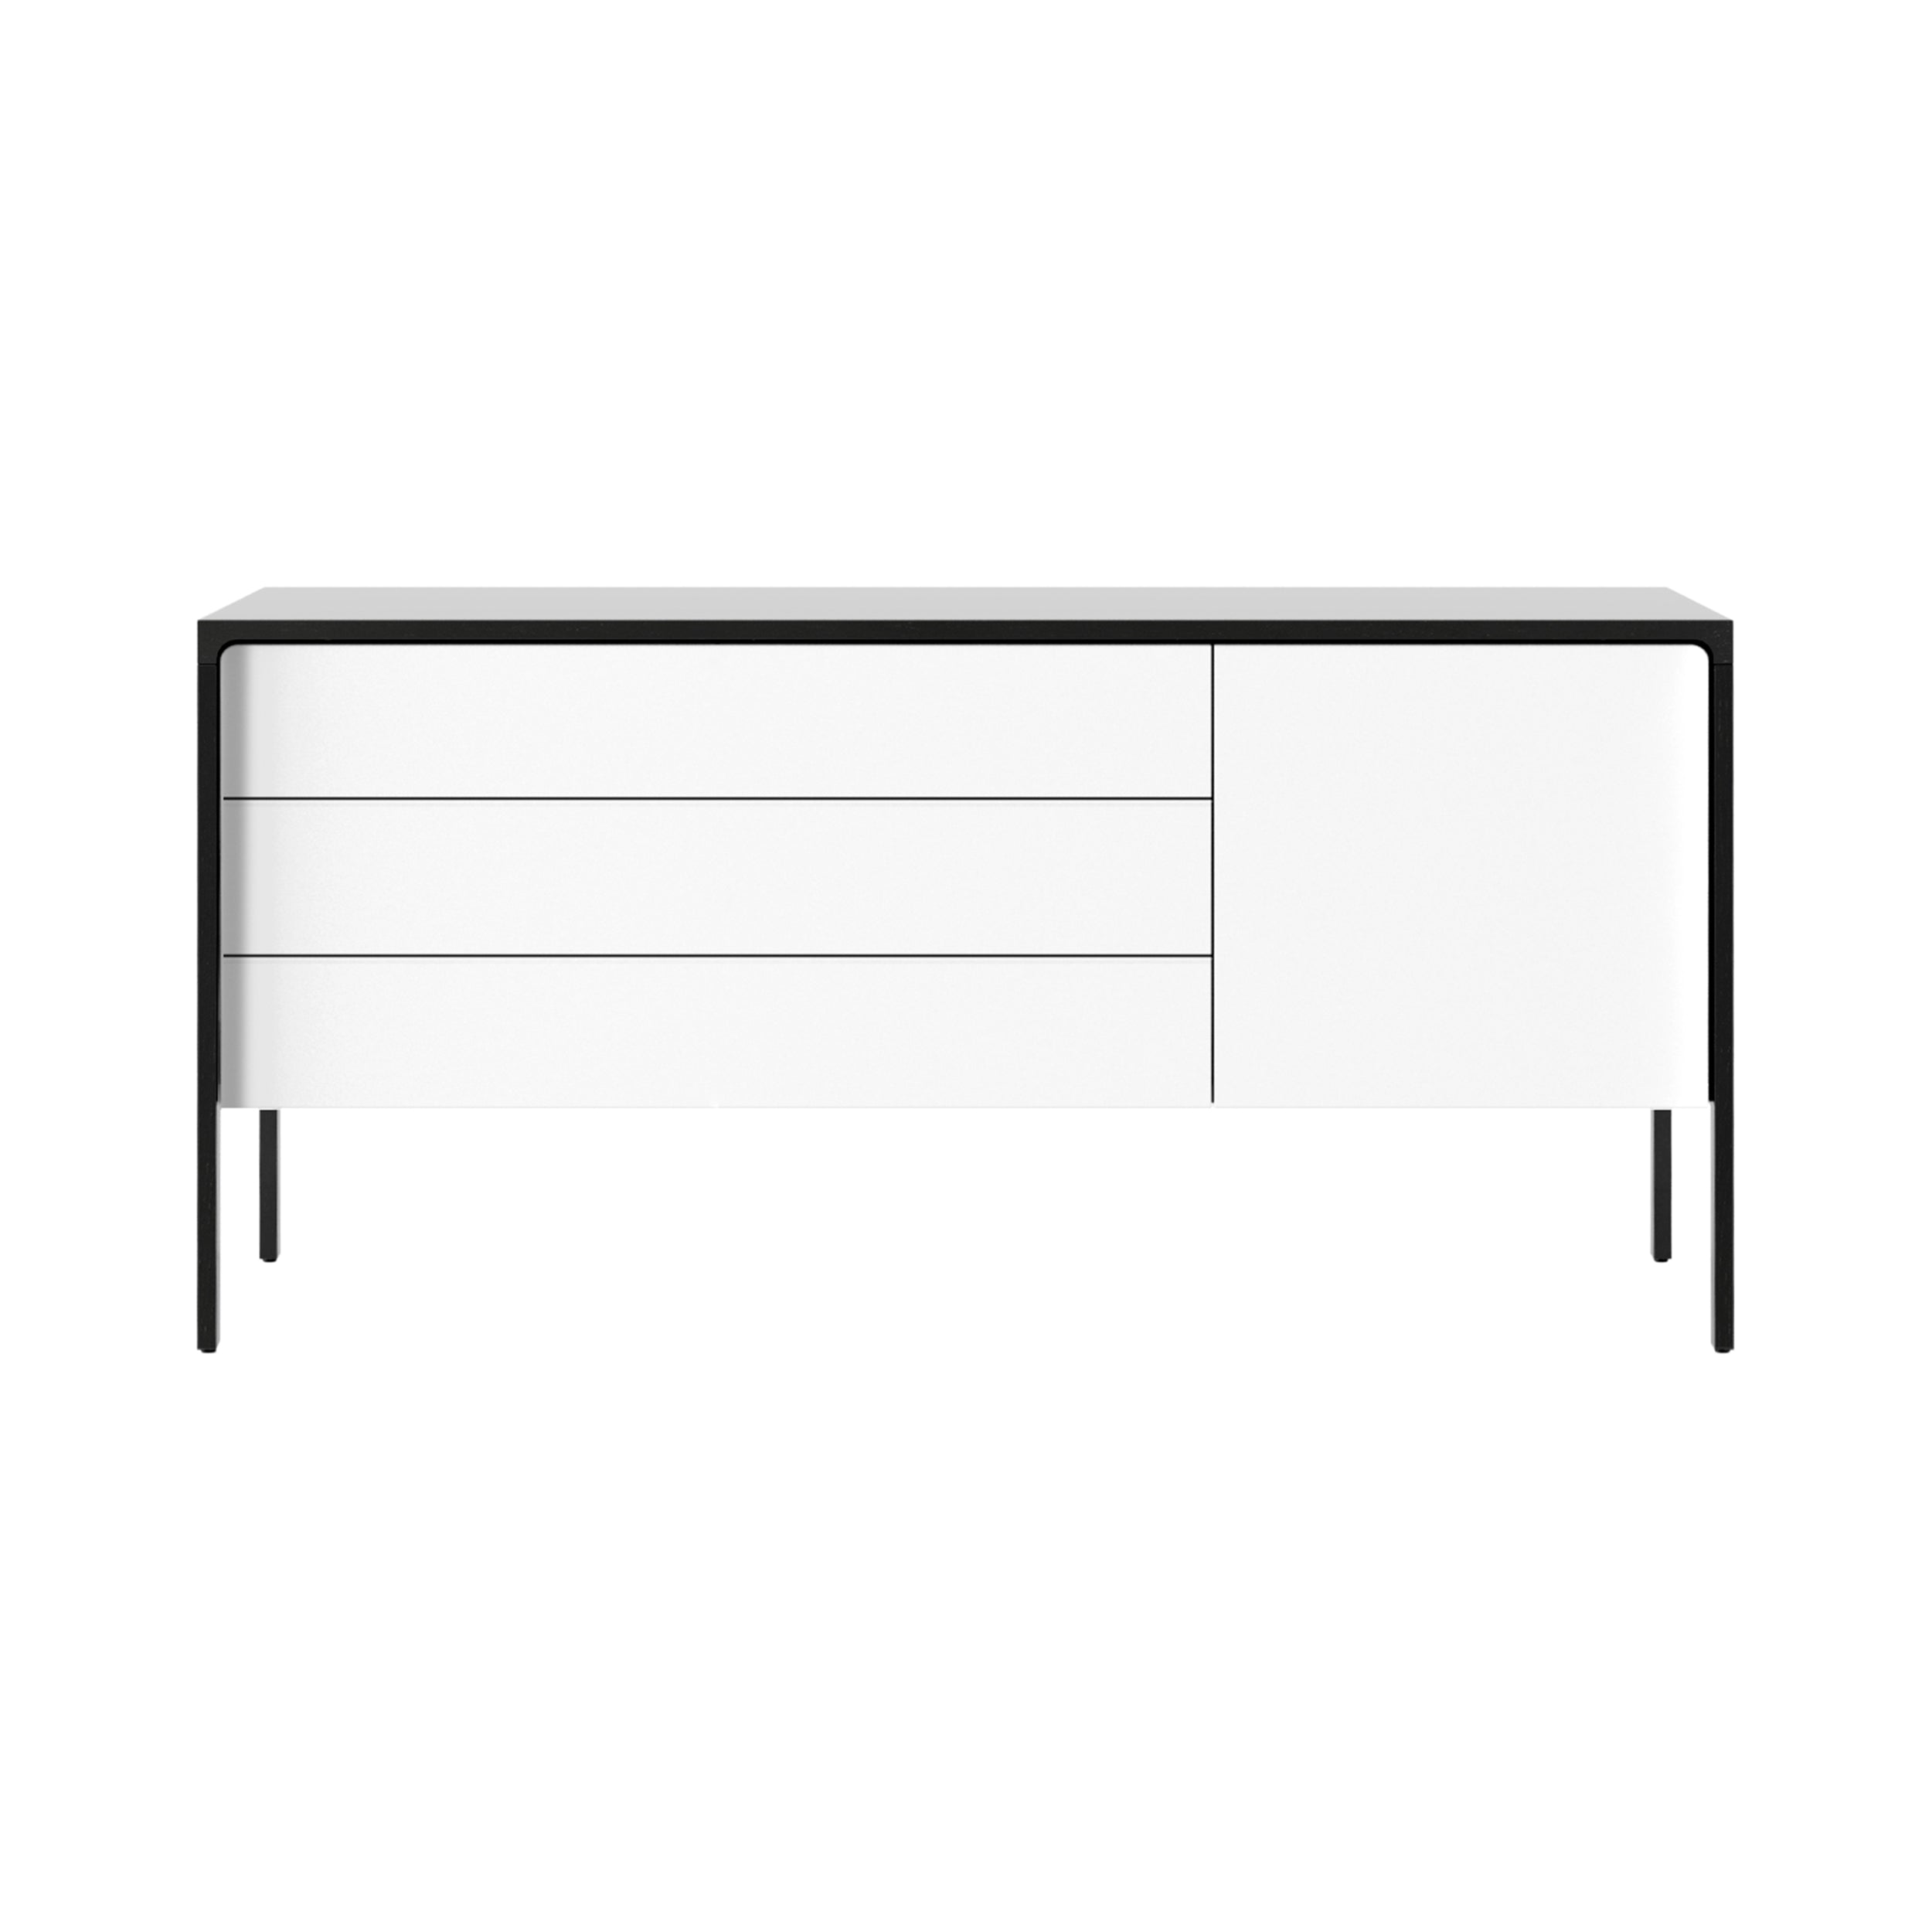 Tactile Sideboard: TAC211 + White Texturised Lacquered + Ebony Stained Oak